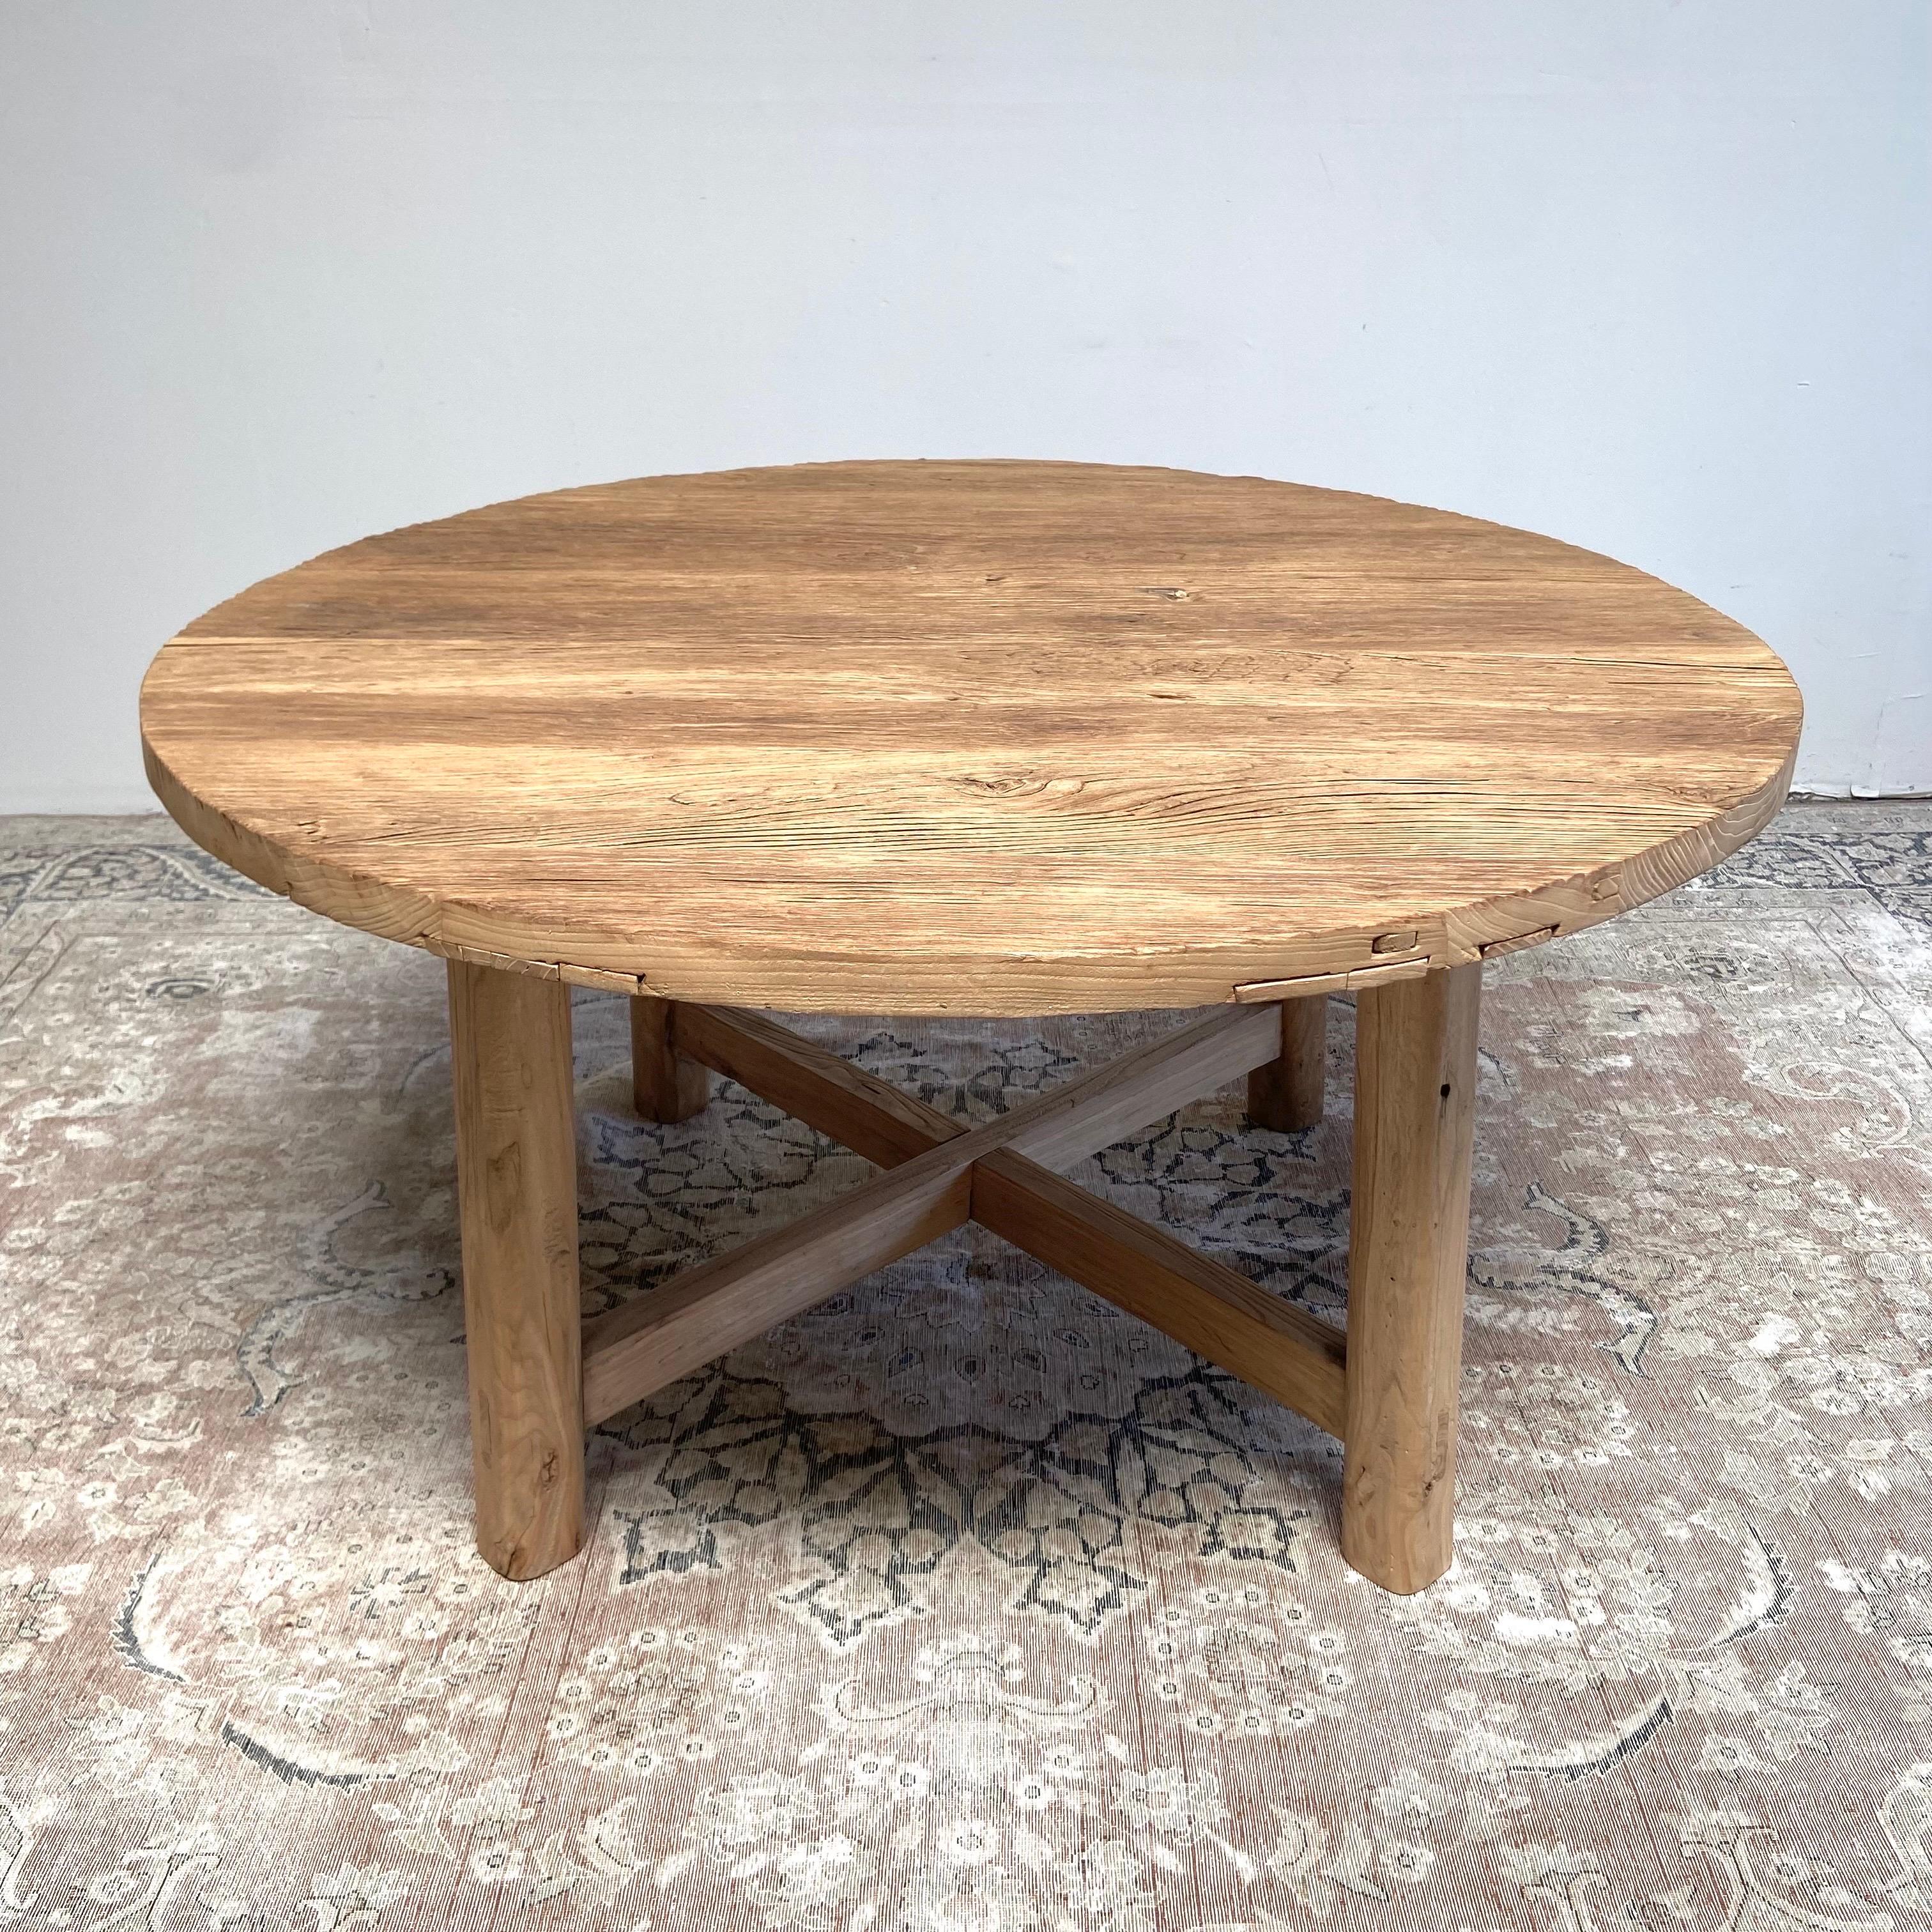 Measures: Round elm dining table 60” rd. x 32” H
( 30” H also available in stock )
Custom made thick top reclaimed elm wood dining table by Bloom Home Inc, in a medium brown finish. 
Table comes in as table top with legs made with dovetail